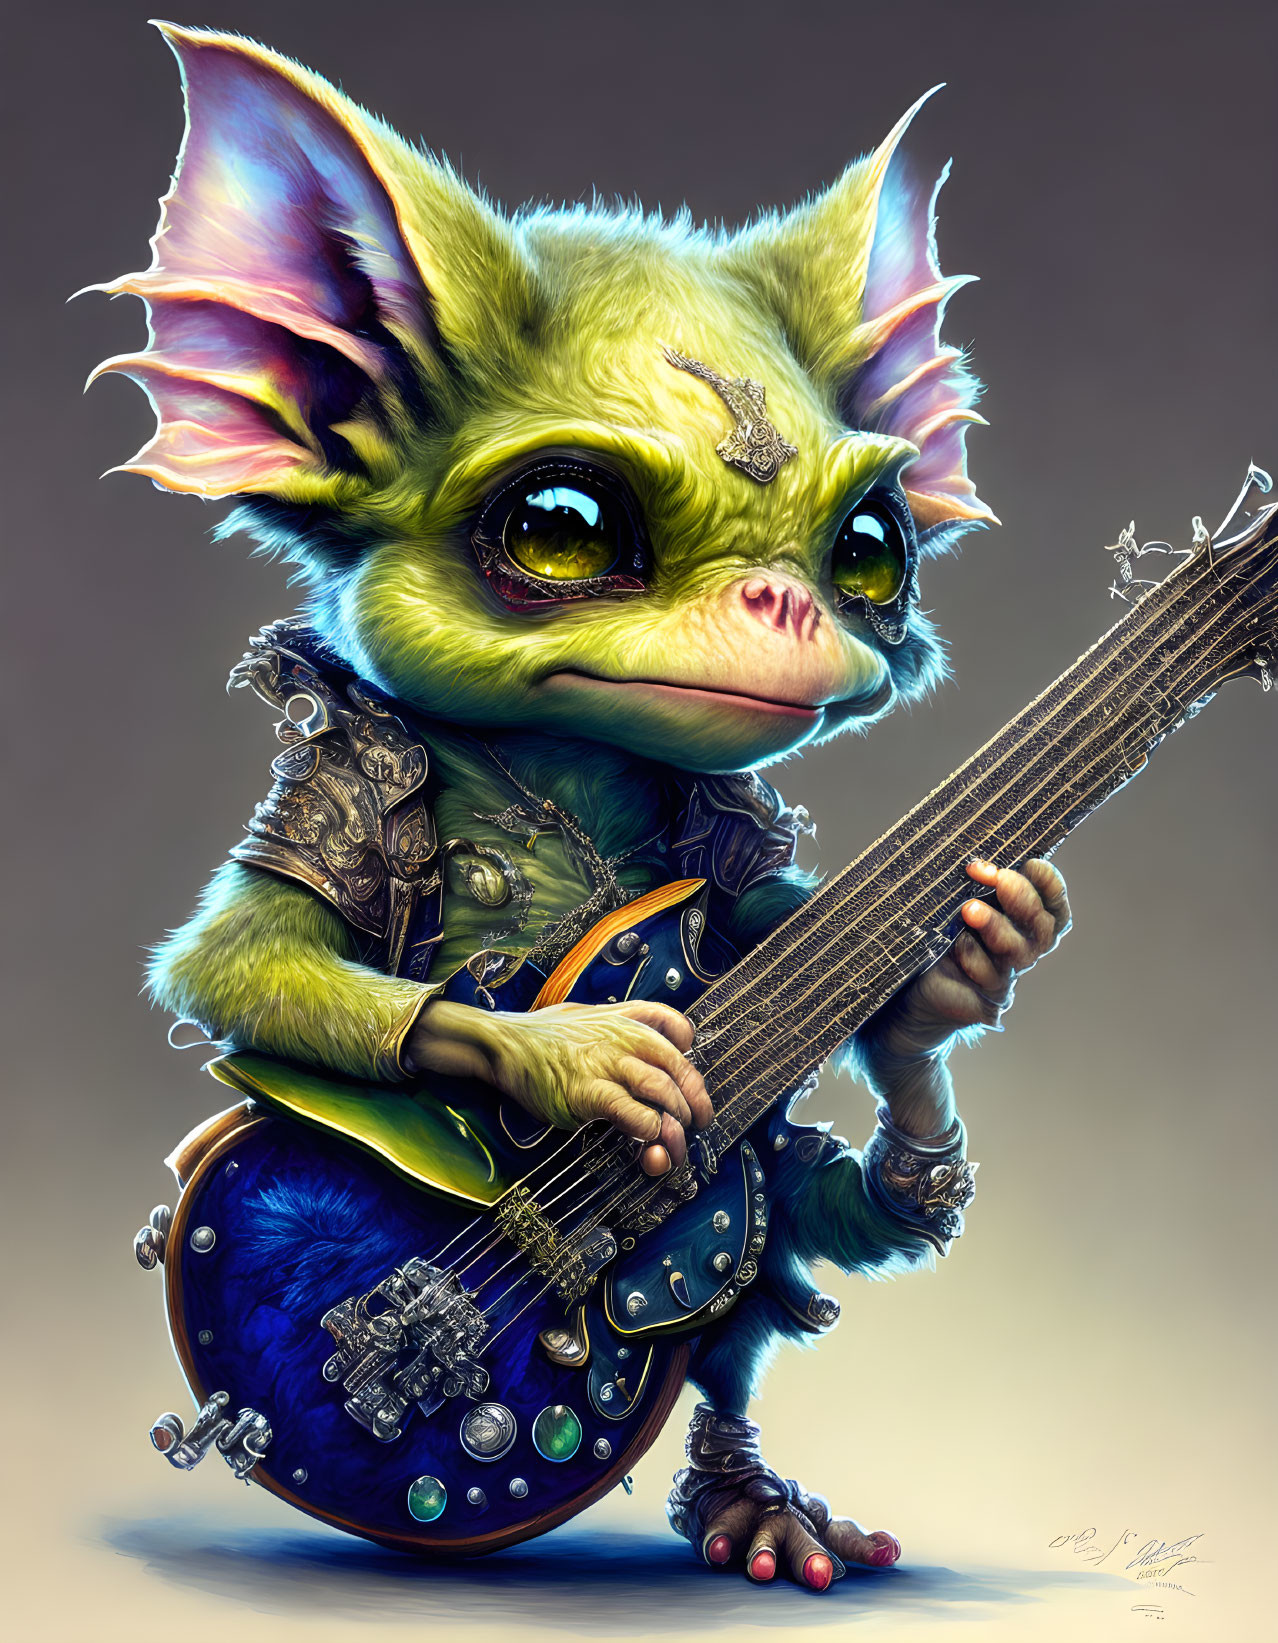 Fantasy creature with large ears playing electric guitar